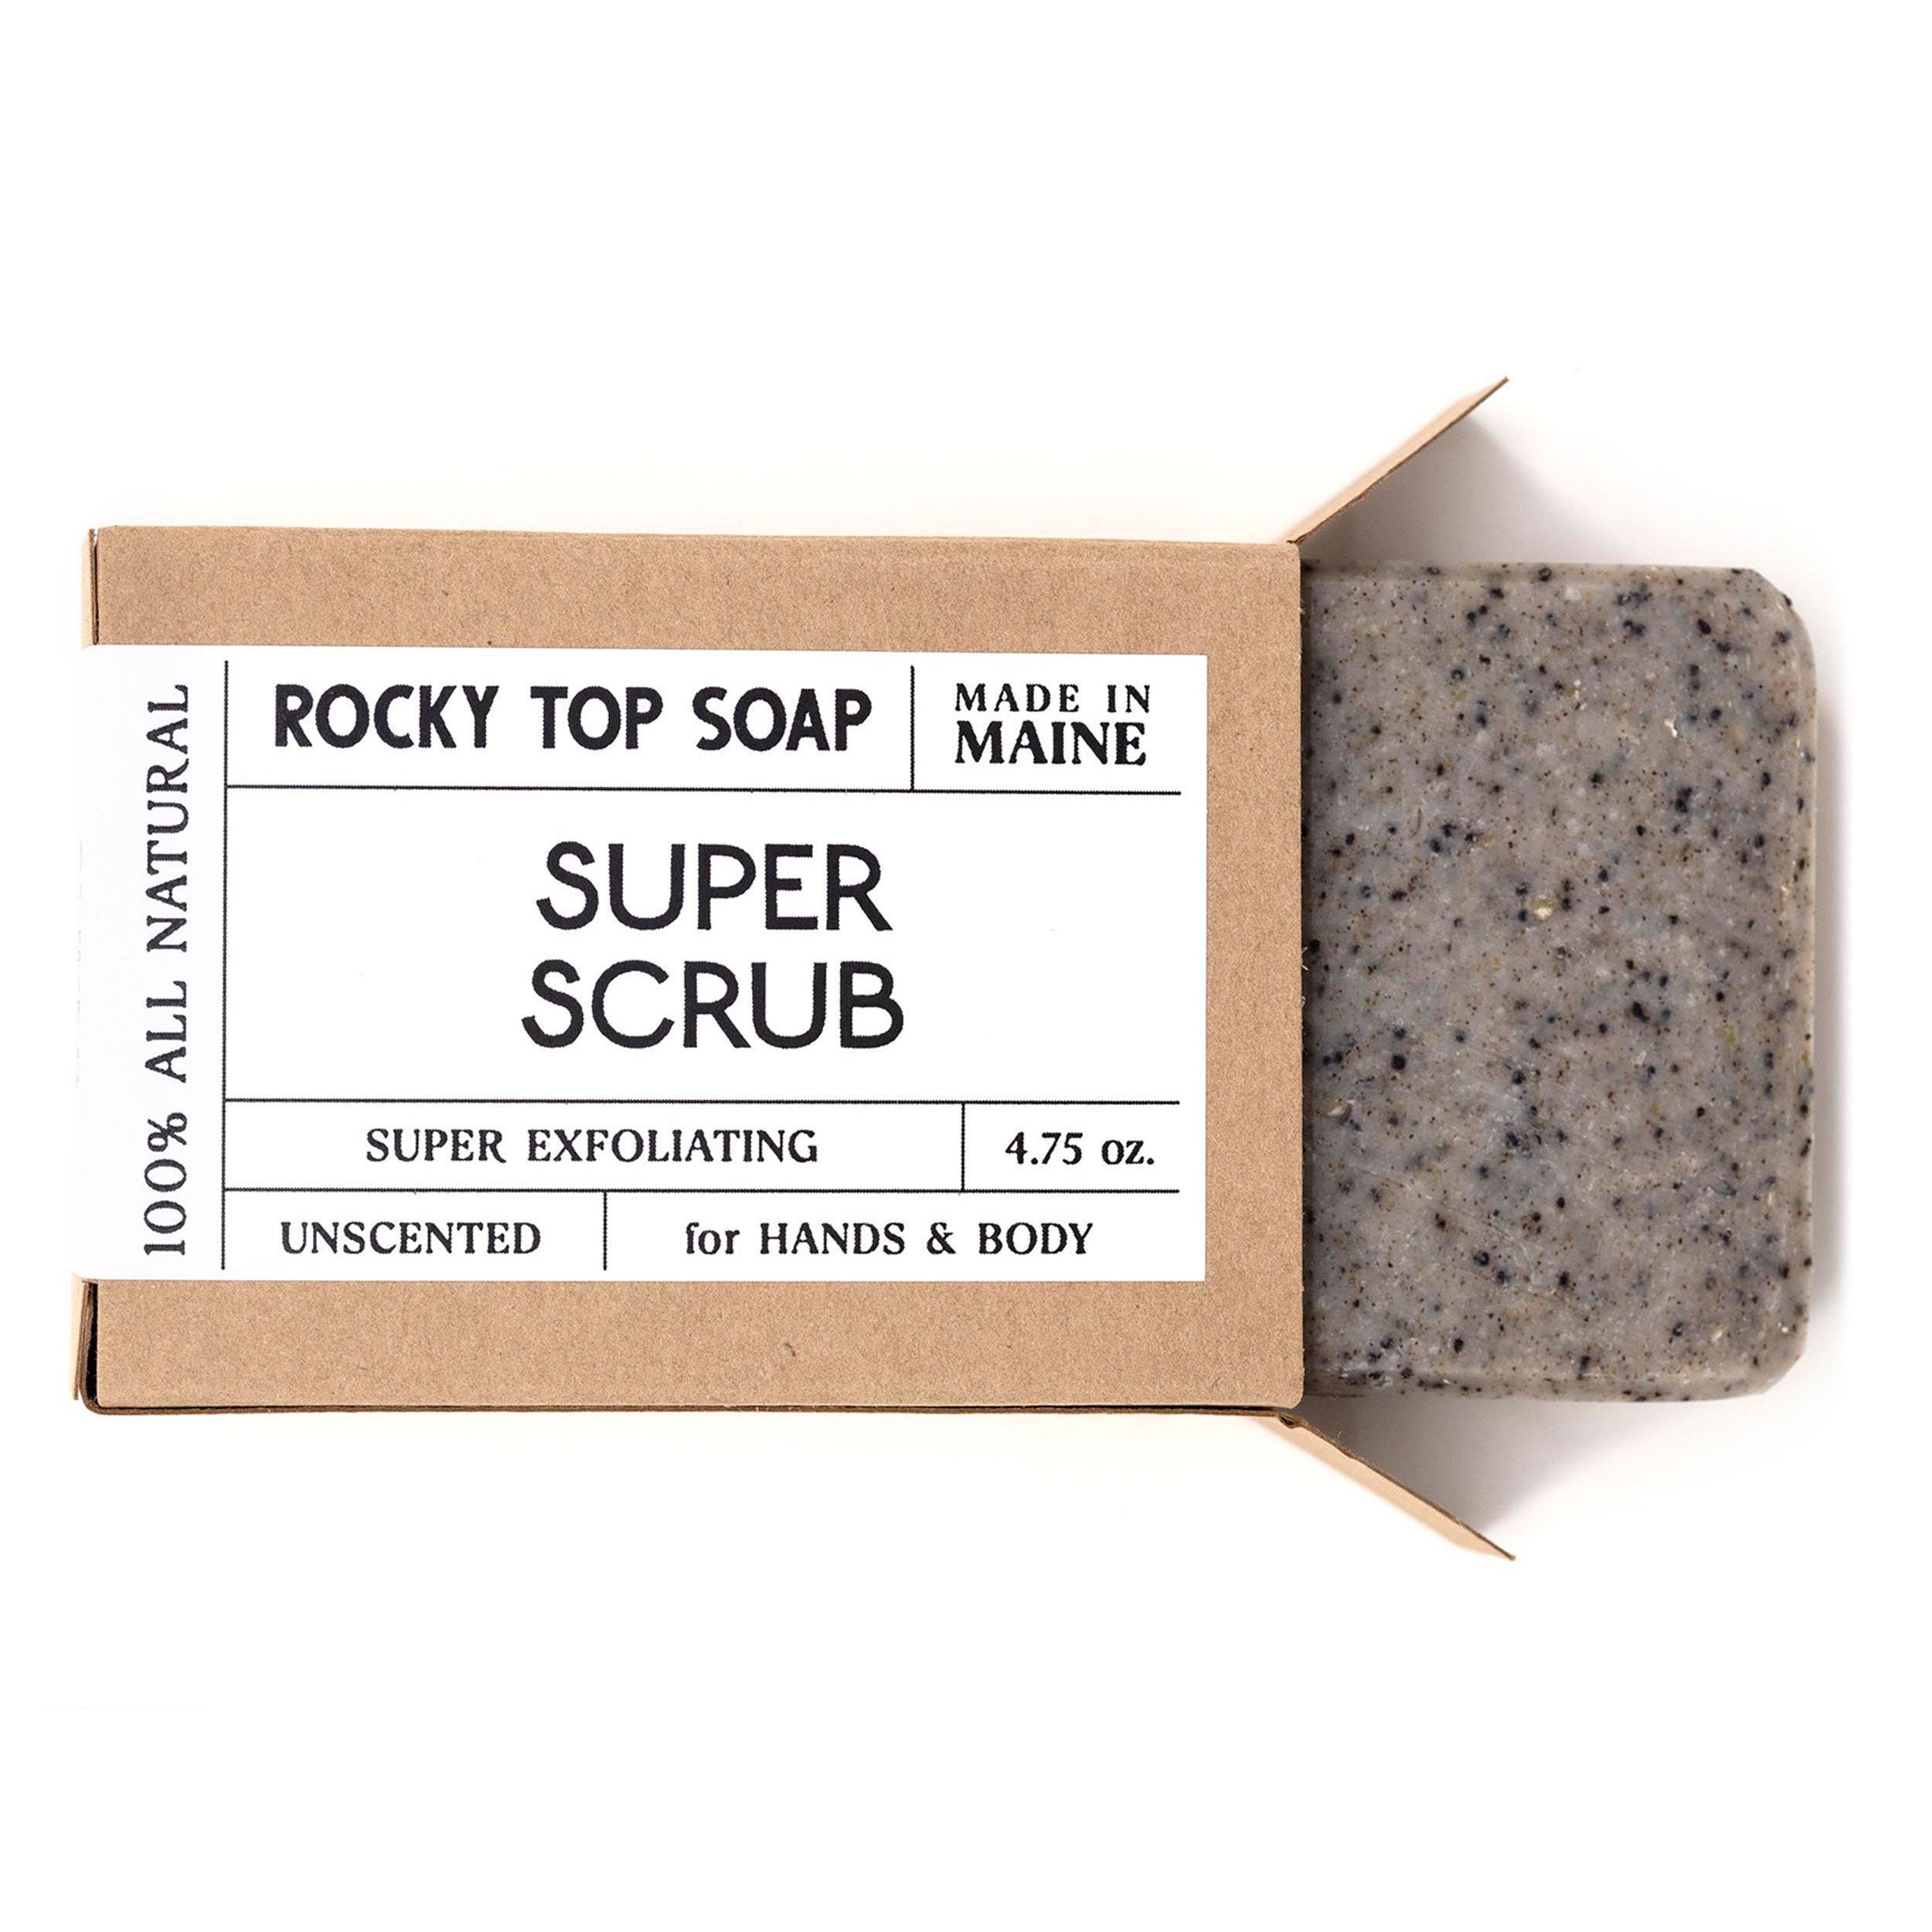 Super Scrub Soap Exfoliating Soap Bar for Body and Hands